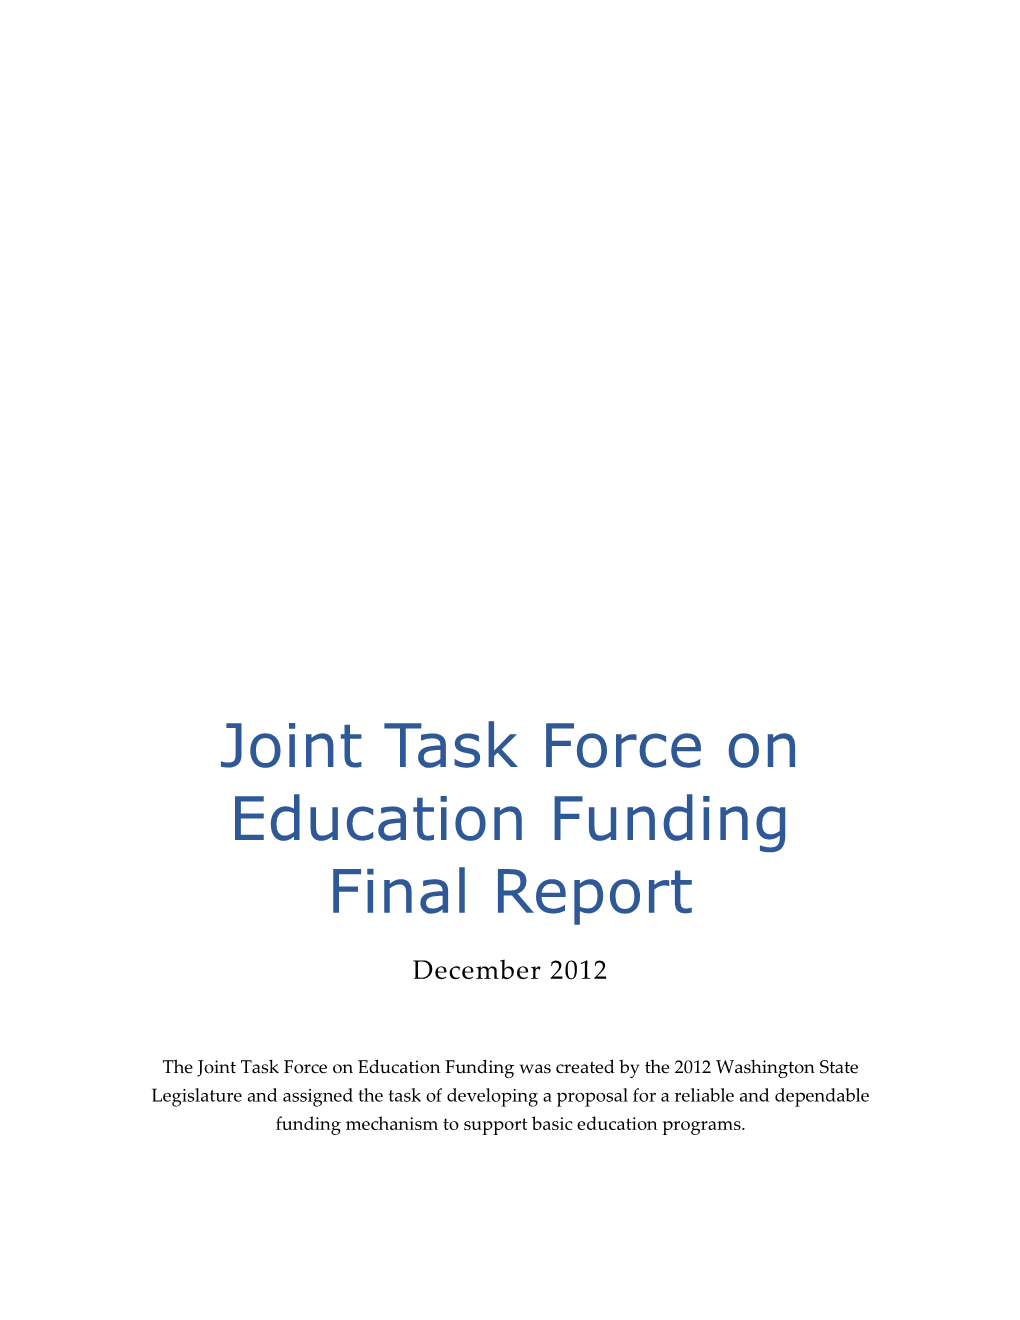 Joint Task Force on Education Funding Final Report